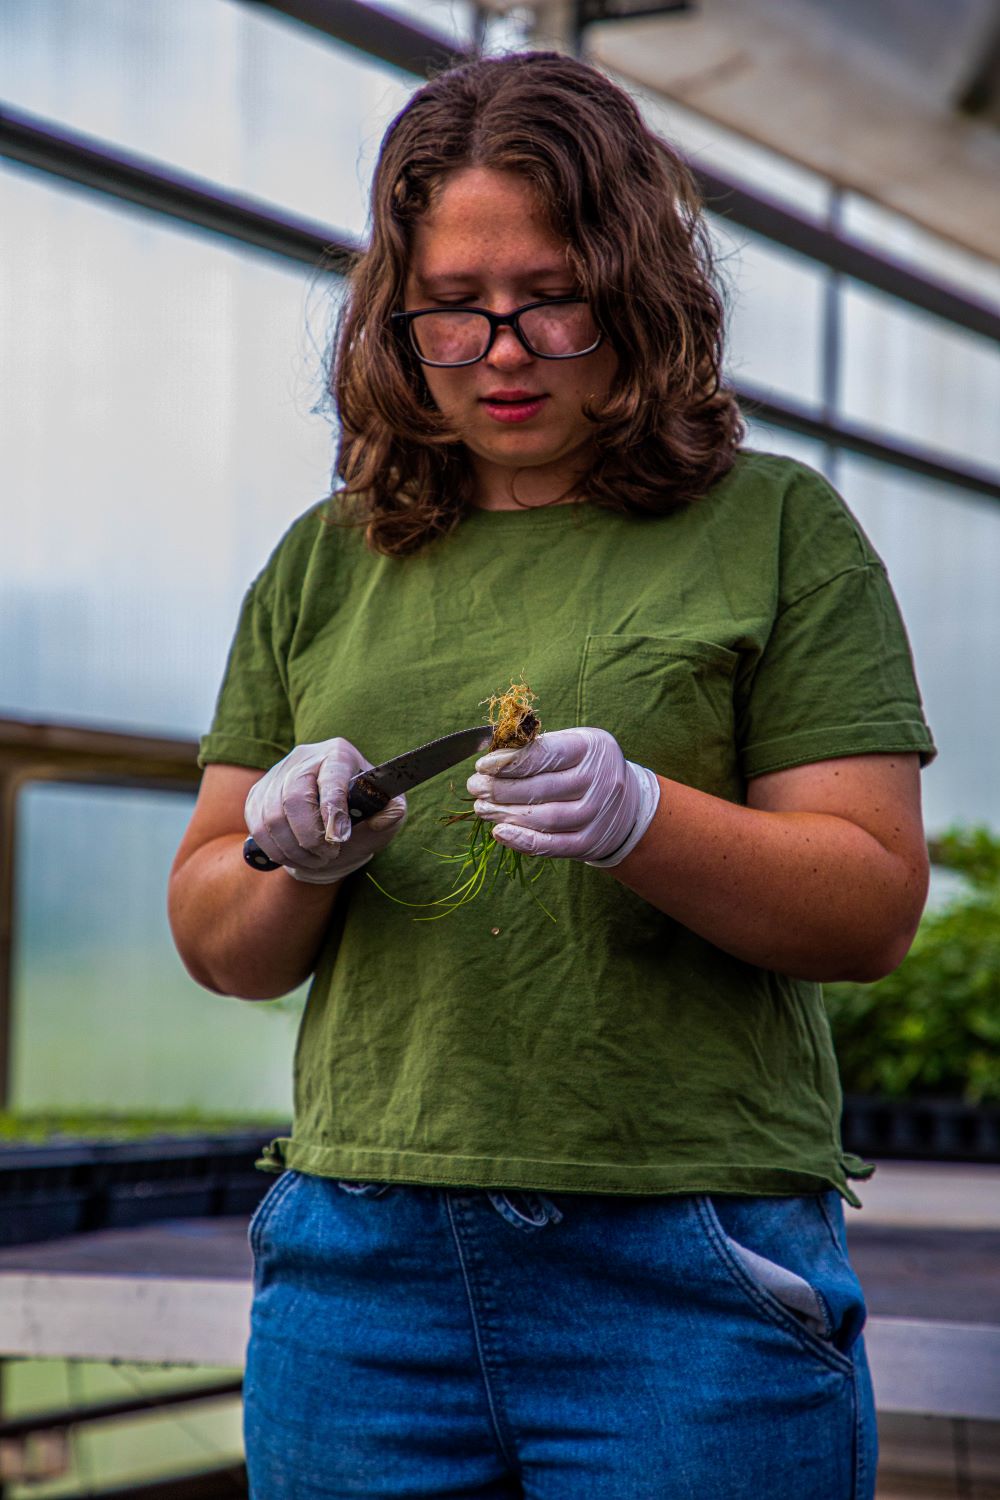 Christina Gualtieri, an intern with Greenbelt Native Plant Center, is studying environmental science at Brooklyn College. While at Greenbelt, she conducted research on tree beds to assess the health of street trees in New York City. Aleksandr Watson / American Forests